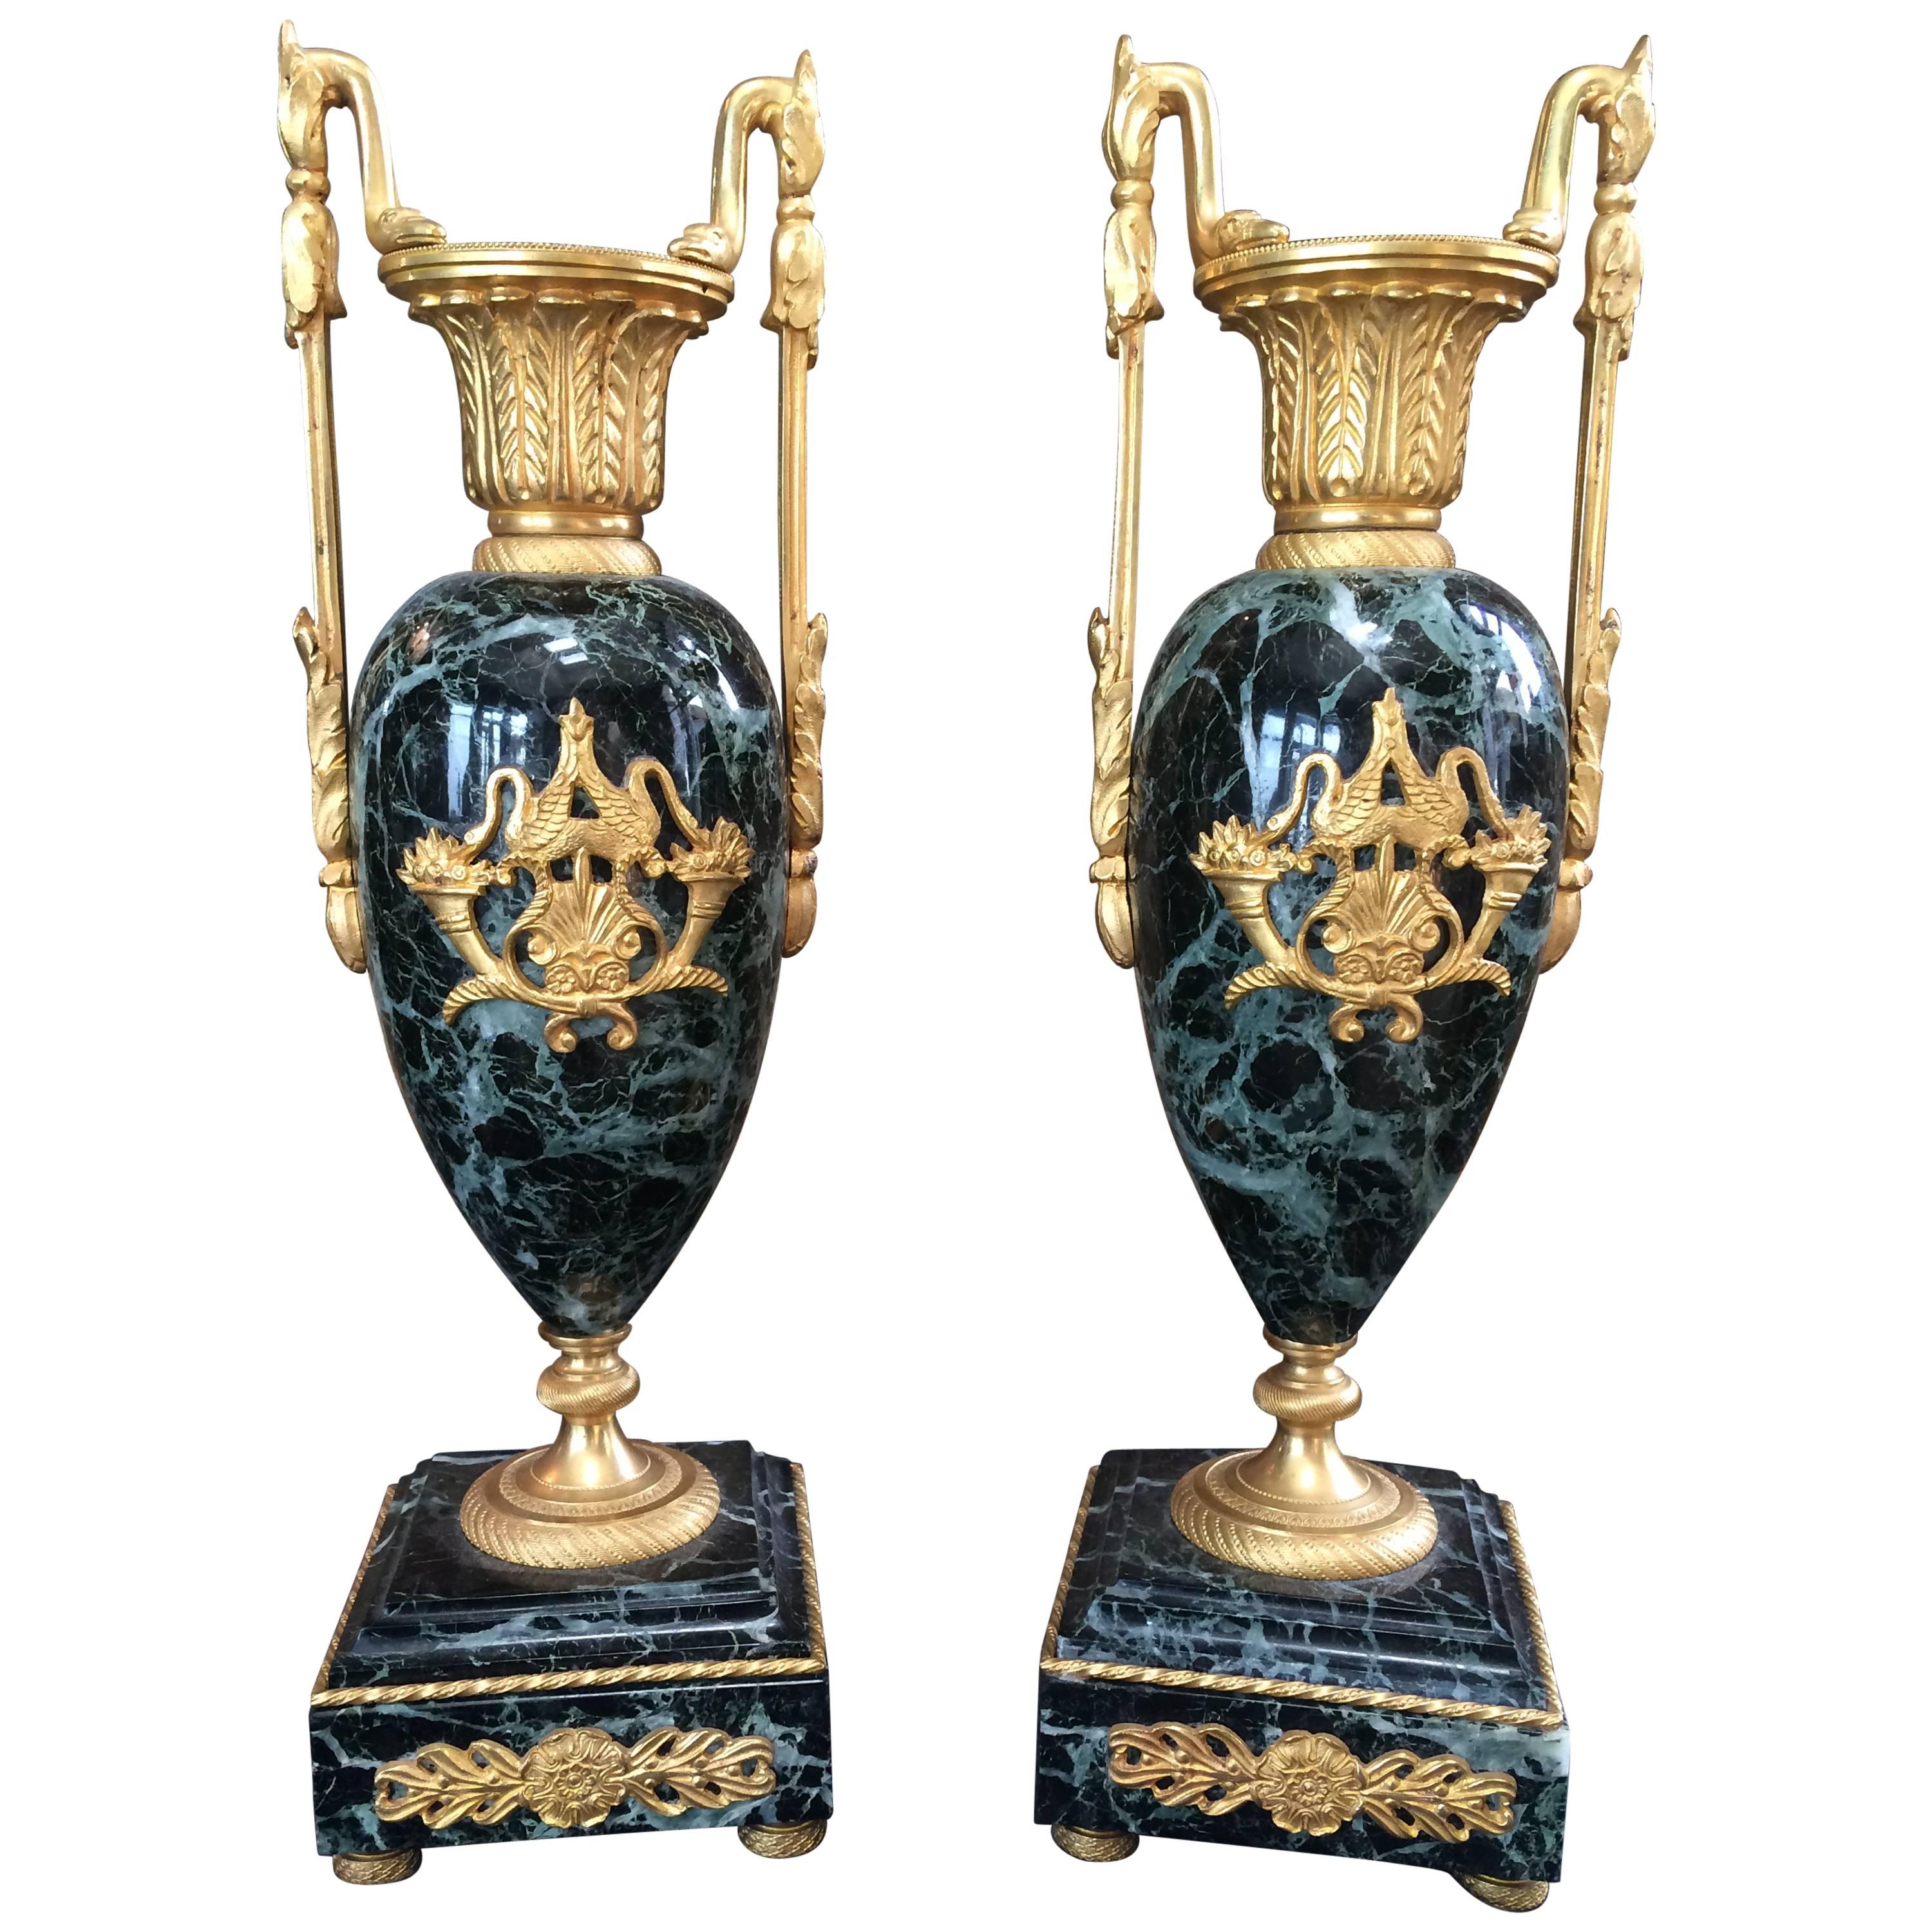 Very Handsome Pair of French Polished Verte Marble and Ormolu Cassolettes